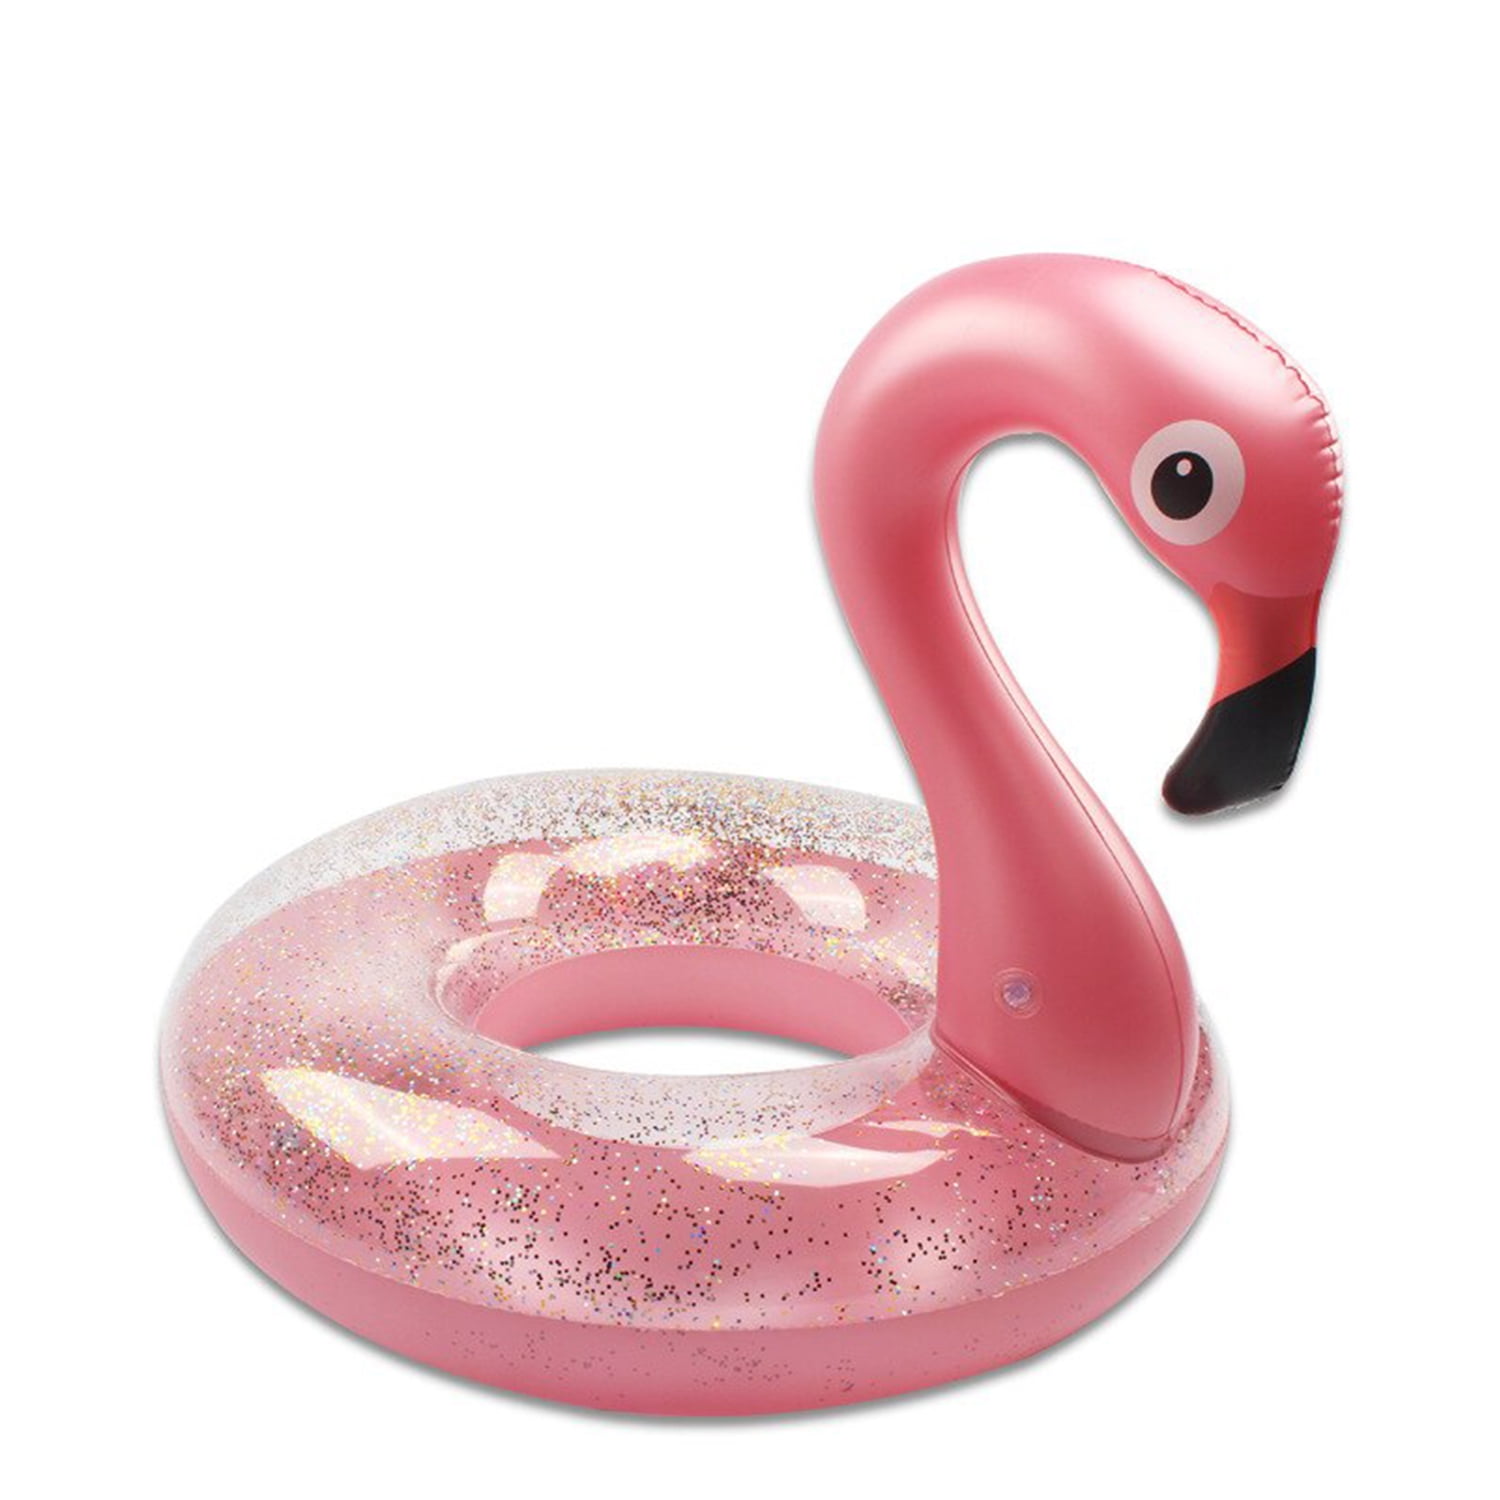 Details about   Inflatable Pool Float heavy duty handles Pink Flamingo bird ride 